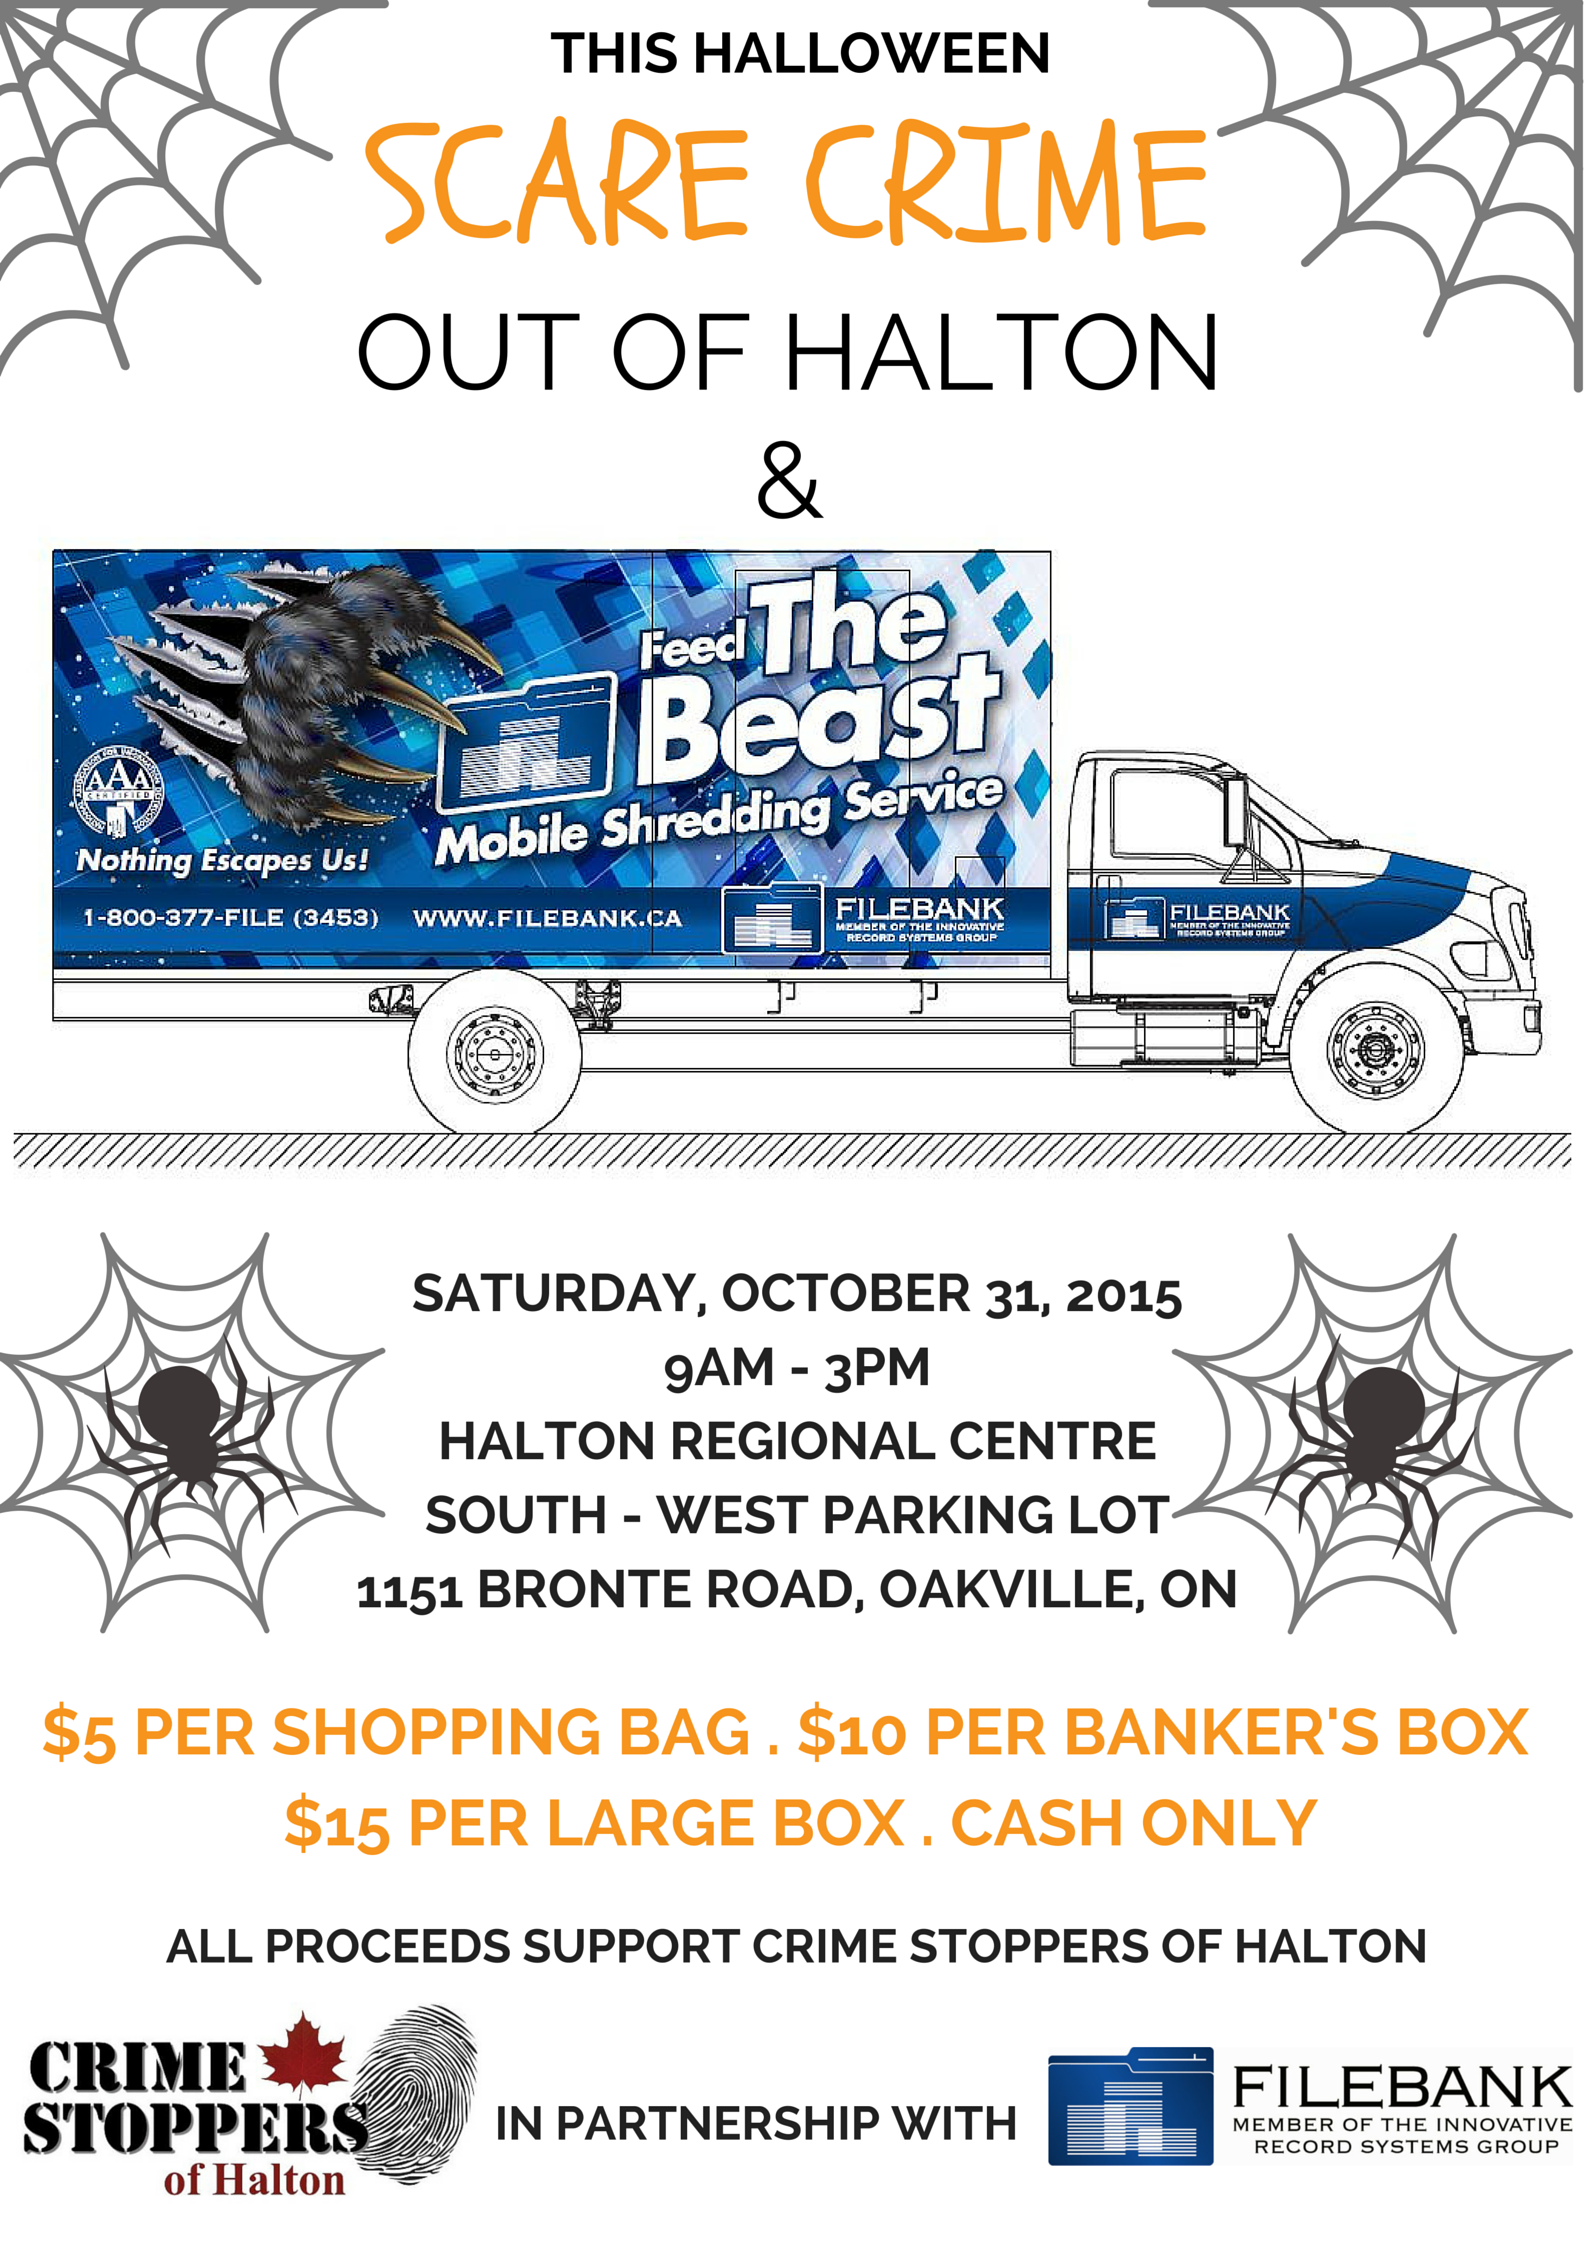 SCARE CRIME OUF OF HALTON AND 'FEED THE BEAST'  SATURDAY, OCTOBER 31ST!